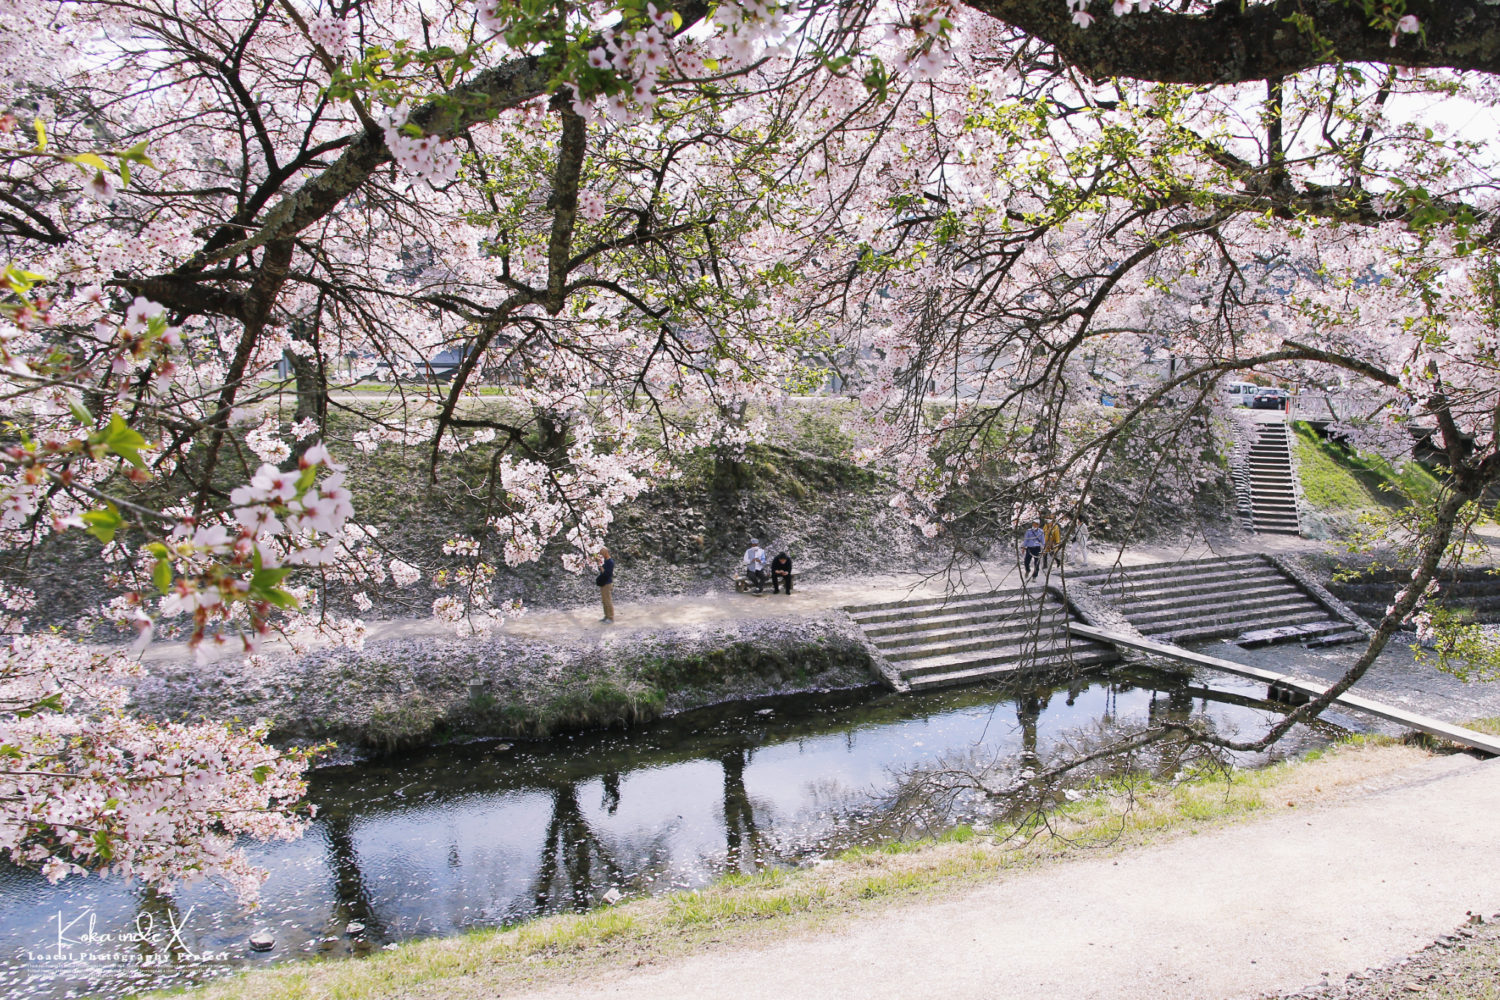 Pictures of River with 1000 cherry blossom trees in Japan.